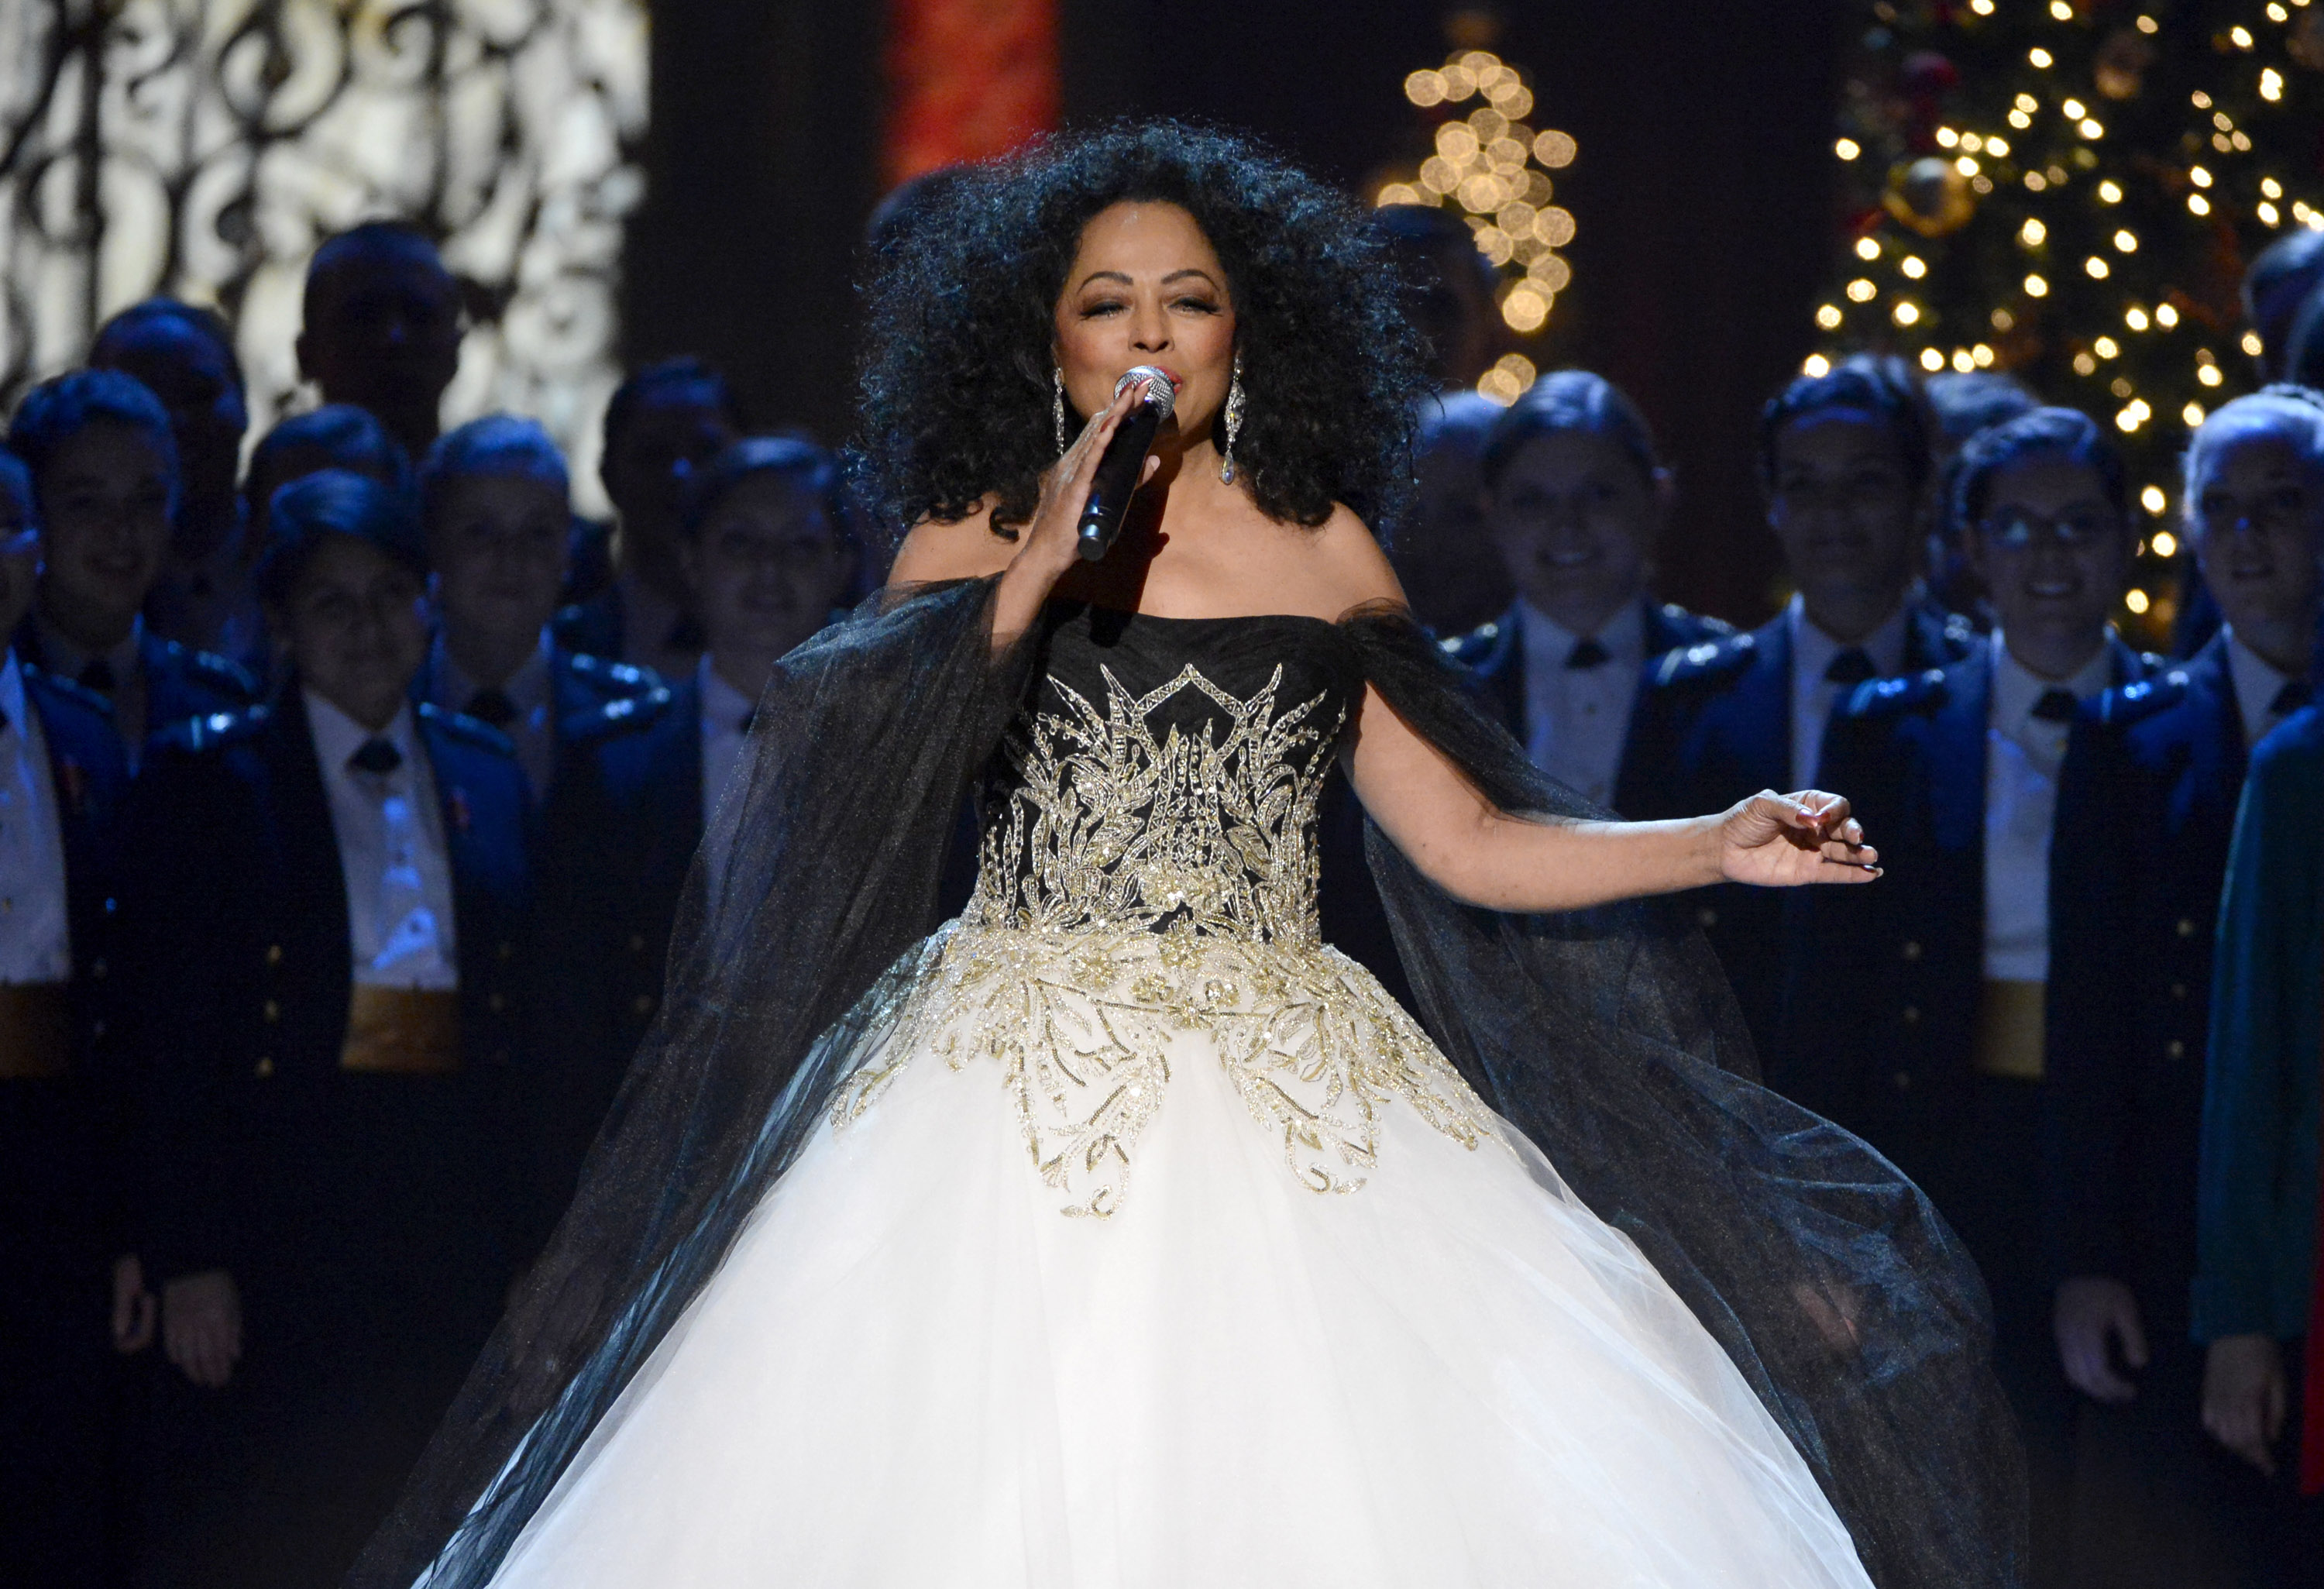 Diana Ross performs onstage during the TNT Christmas in Washington 2012 at the National Building Museum on December 9, 2012 in Washington, DC.